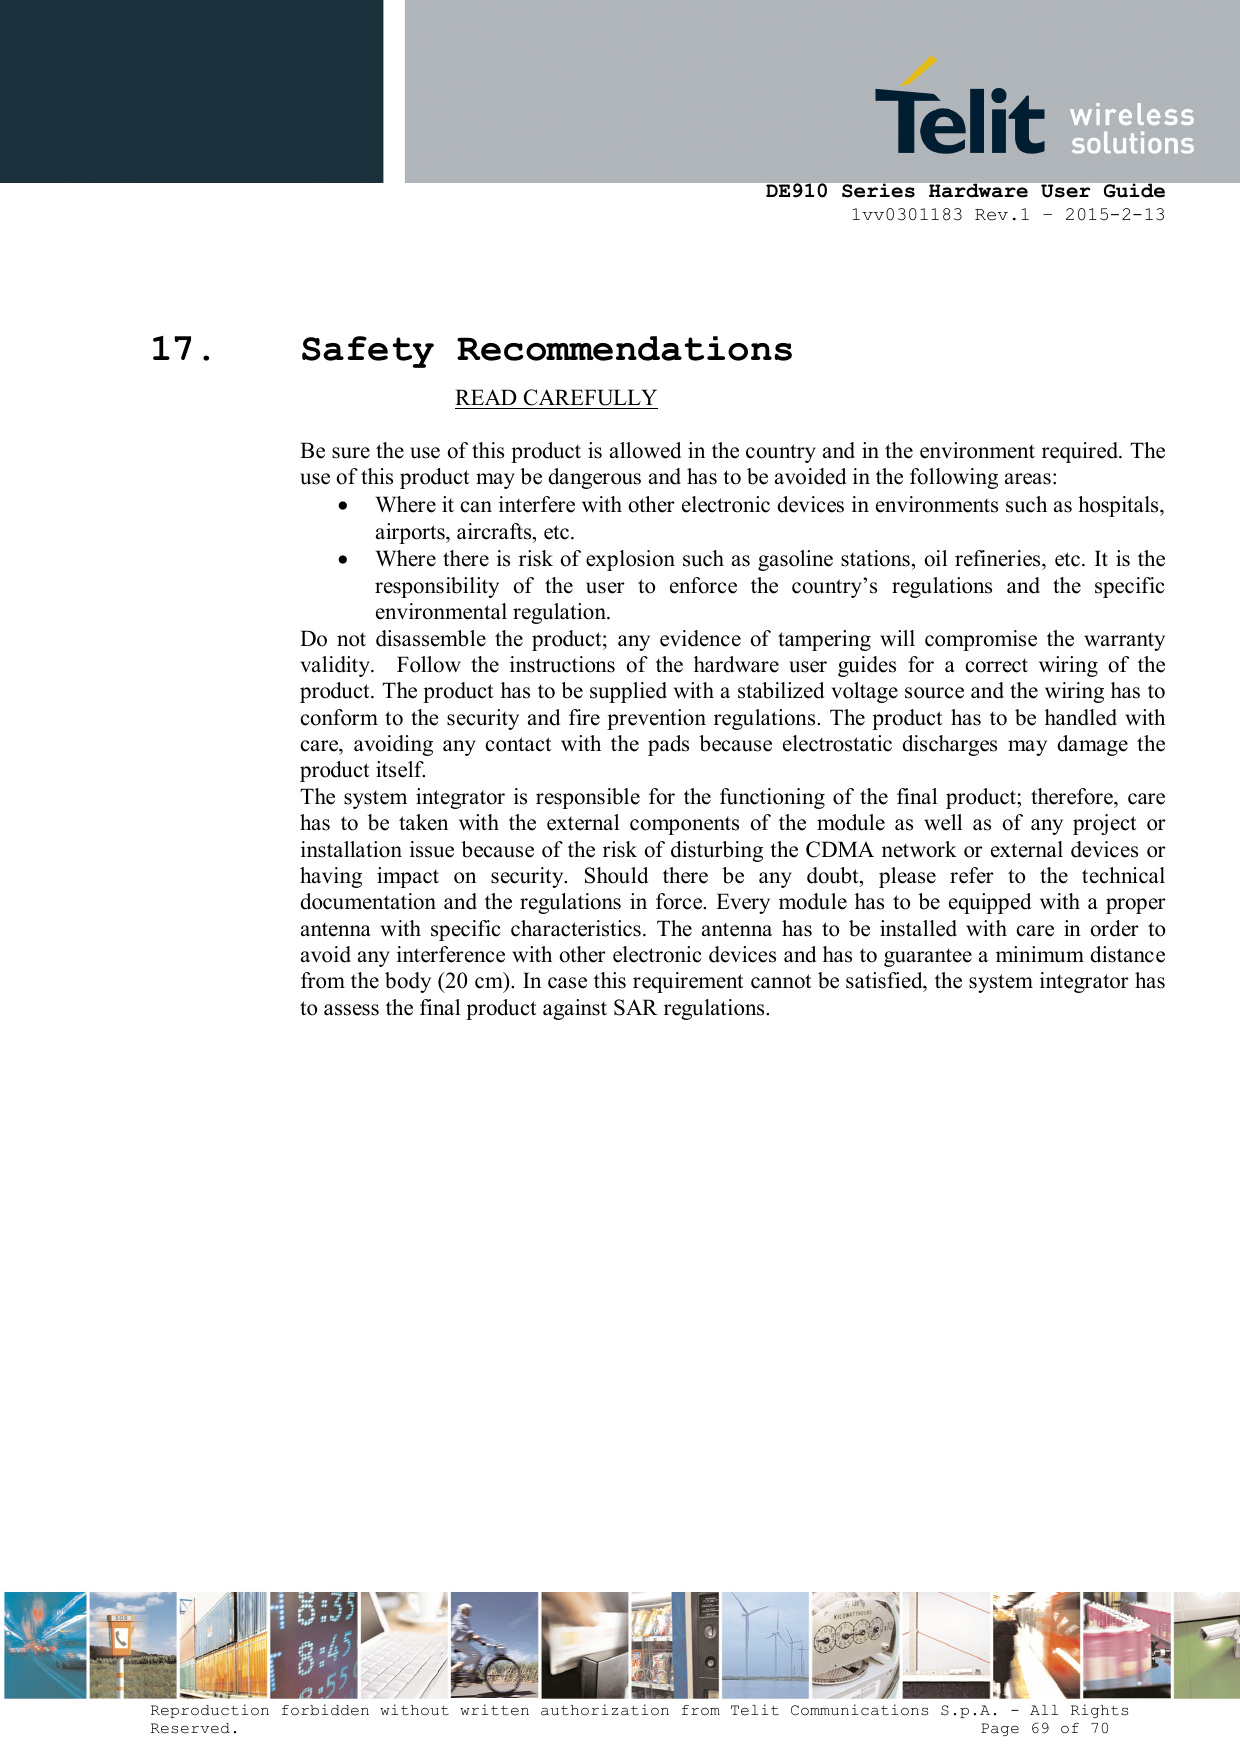      DE910 Series Hardware User Guide 1vv0301183 Rev.1 – 2015-2-13 Reproduction forbidden without written authorization from Telit Communications S.p.A. - All Rights Reserved.                                                                          Page 69 of 70 17. Safety Recommendations                            READ CAREFULLY  Be sure the use of this product is allowed in the country and in the environment required. The use of this product may be dangerous and has to be avoided in the following areas:  Where it can interfere with other electronic devices in environments such as hospitals, airports, aircrafts, etc.  Where there is risk of explosion such as gasoline stations, oil refineries, etc. It is the responsibility  of  the  user  to  enforce  the  country’s  regulations  and  the  specific environmental regulation. Do  not  disassemble  the  product;  any  evidence  of  tampering  will  compromise  the  warranty validity.    Follow  the  instructions  of  the  hardware  user  guides  for  a  correct  wiring  of  the product. The product has to be supplied with a stabilized voltage source and the wiring has to conform to the  security and fire prevention regulations. The product  has to be  handled with care,  avoiding  any  contact  with  the  pads  because  electrostatic  discharges  may  damage  the product itself.  The  system  integrator is responsible  for  the  functioning of the final product;  therefore,  care has  to  be  taken  with  the  external  components  of  the  module  as  well  as  of  any  project  or installation issue because of the risk of disturbing the CDMA network or external devices or having  impact  on  security.  Should  there  be  any  doubt,  please  refer  to  the  technical documentation  and the regulations in force. Every  module has to be  equipped  with a proper antenna  with  specific  characteristics.  The  antenna  has  to  be  installed  with  care  in  order  to avoid any interference with other electronic devices and has to guarantee a minimum distance from the body (20 cm). In case this requirement cannot be satisfied, the system integrator has to assess the final product against SAR regulations.   